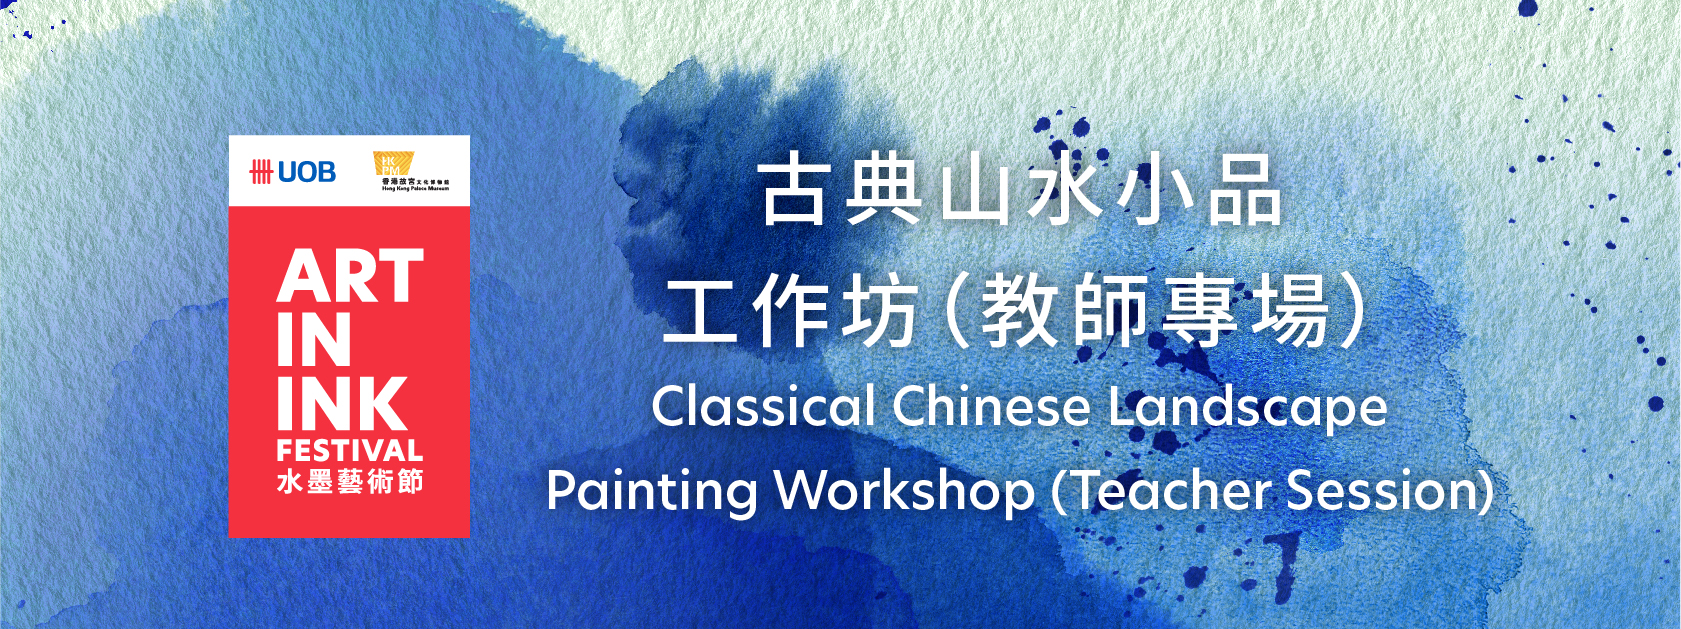 Classical Chinese Landscape Painting Workshop (Teacher Session)